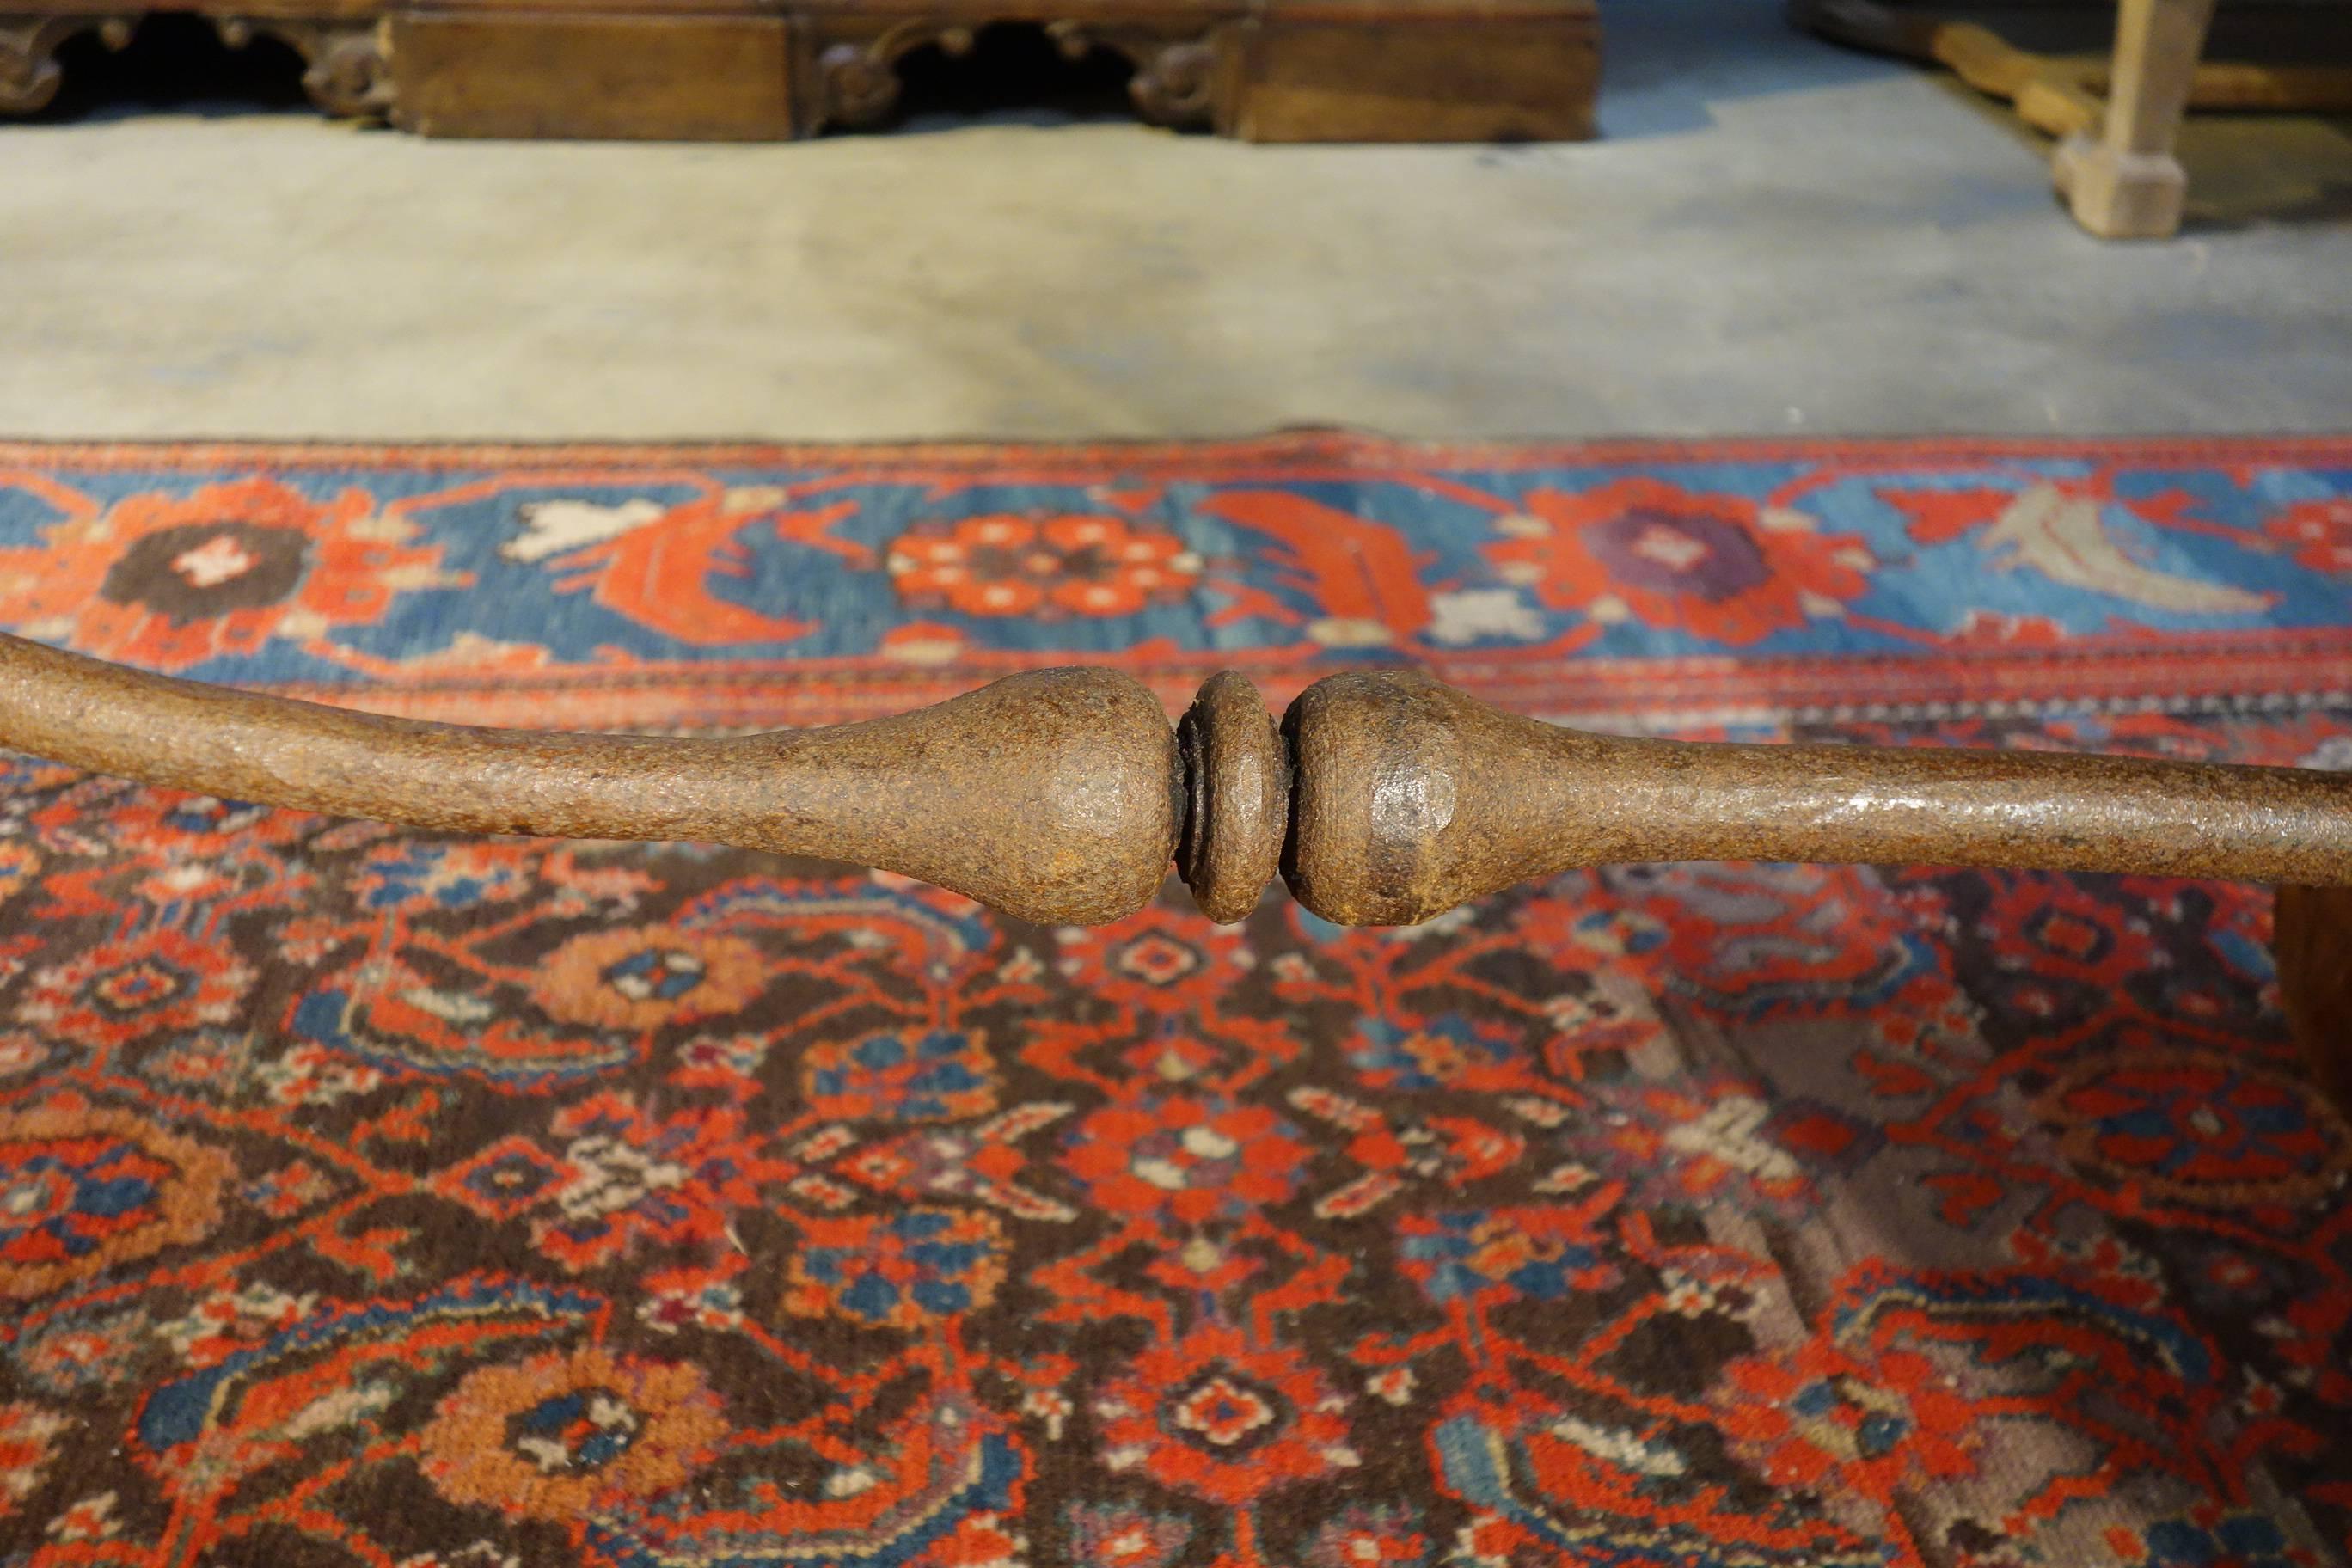 17th C Style Italian LIRA Solid Walnut Refectory Table Forged Iron with options For Sale 5